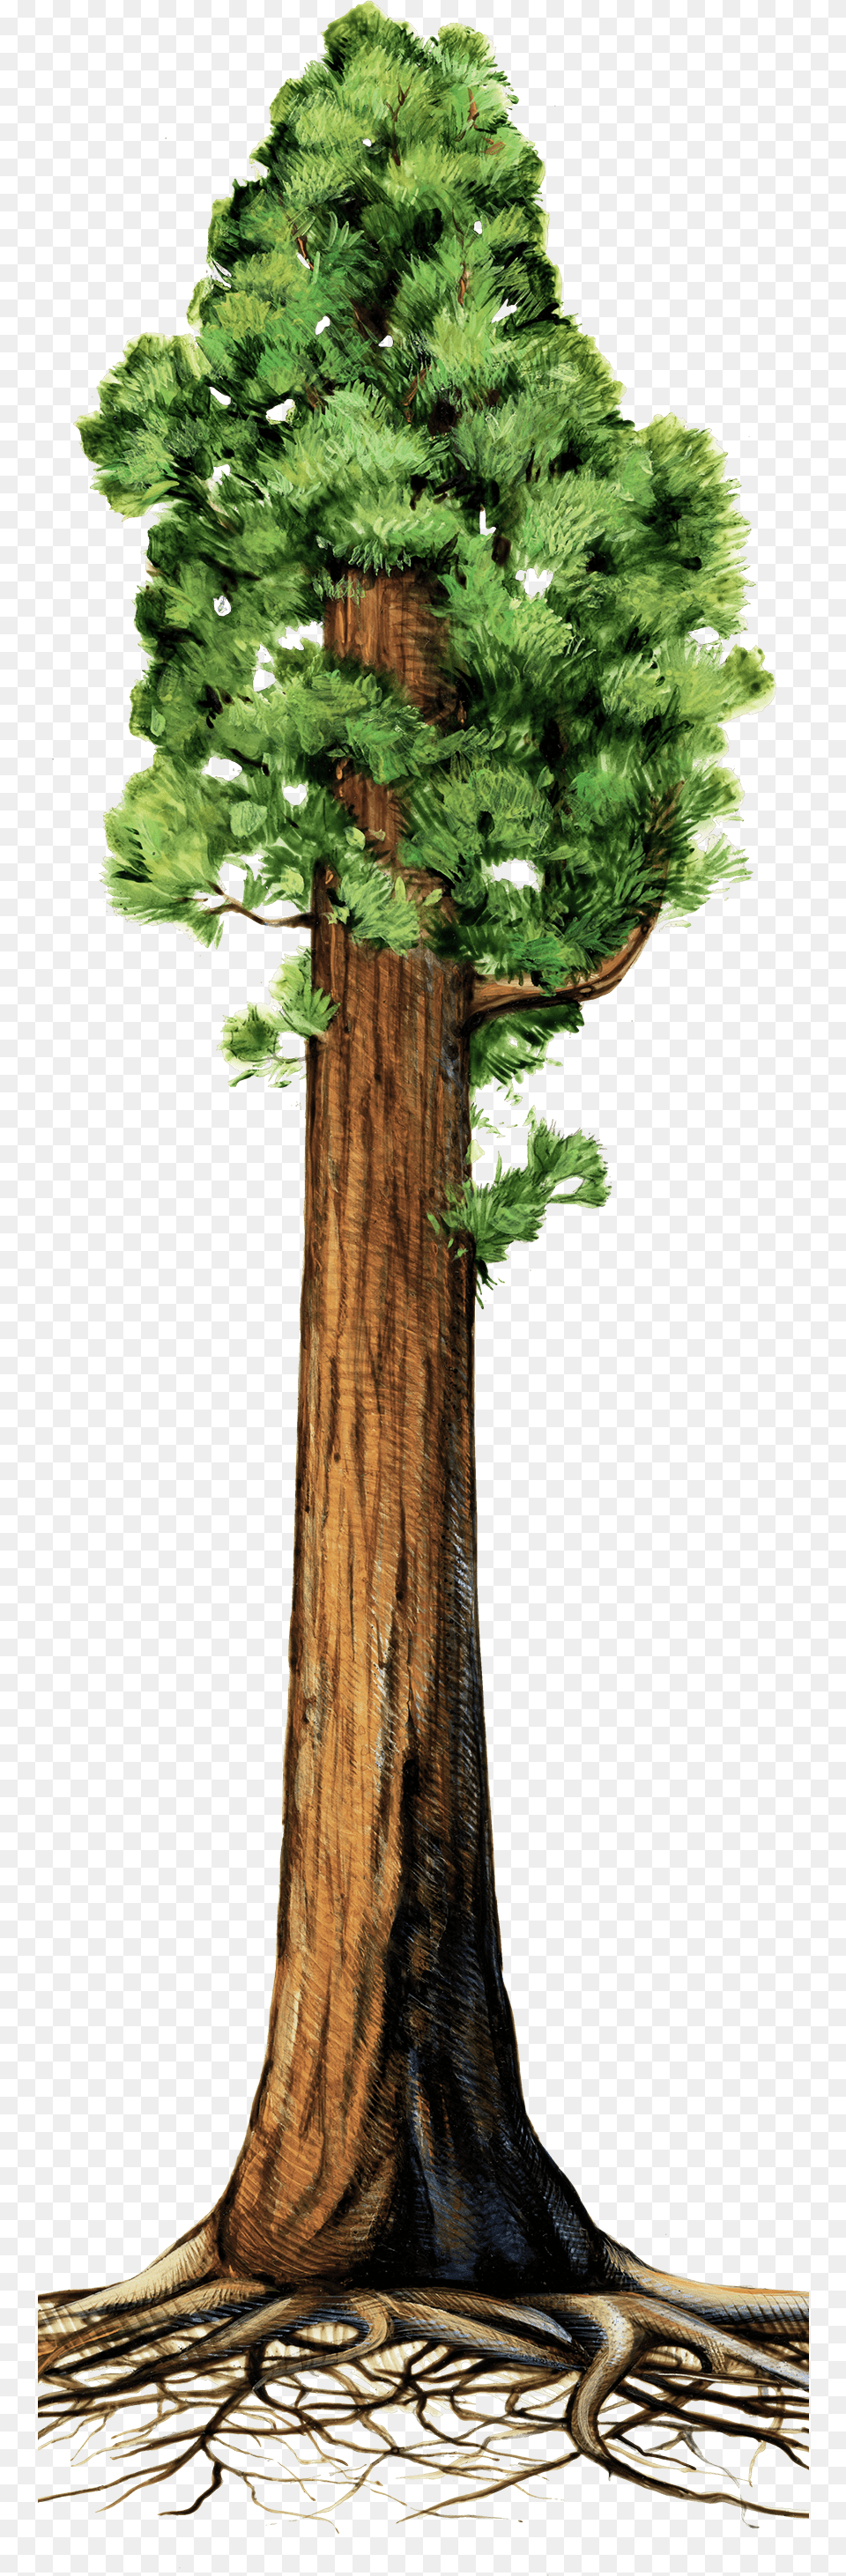 The Making Of A Giant Giant Sequoia Tree Clipart, Plant, Tree Trunk, Conifer Free Transparent Png